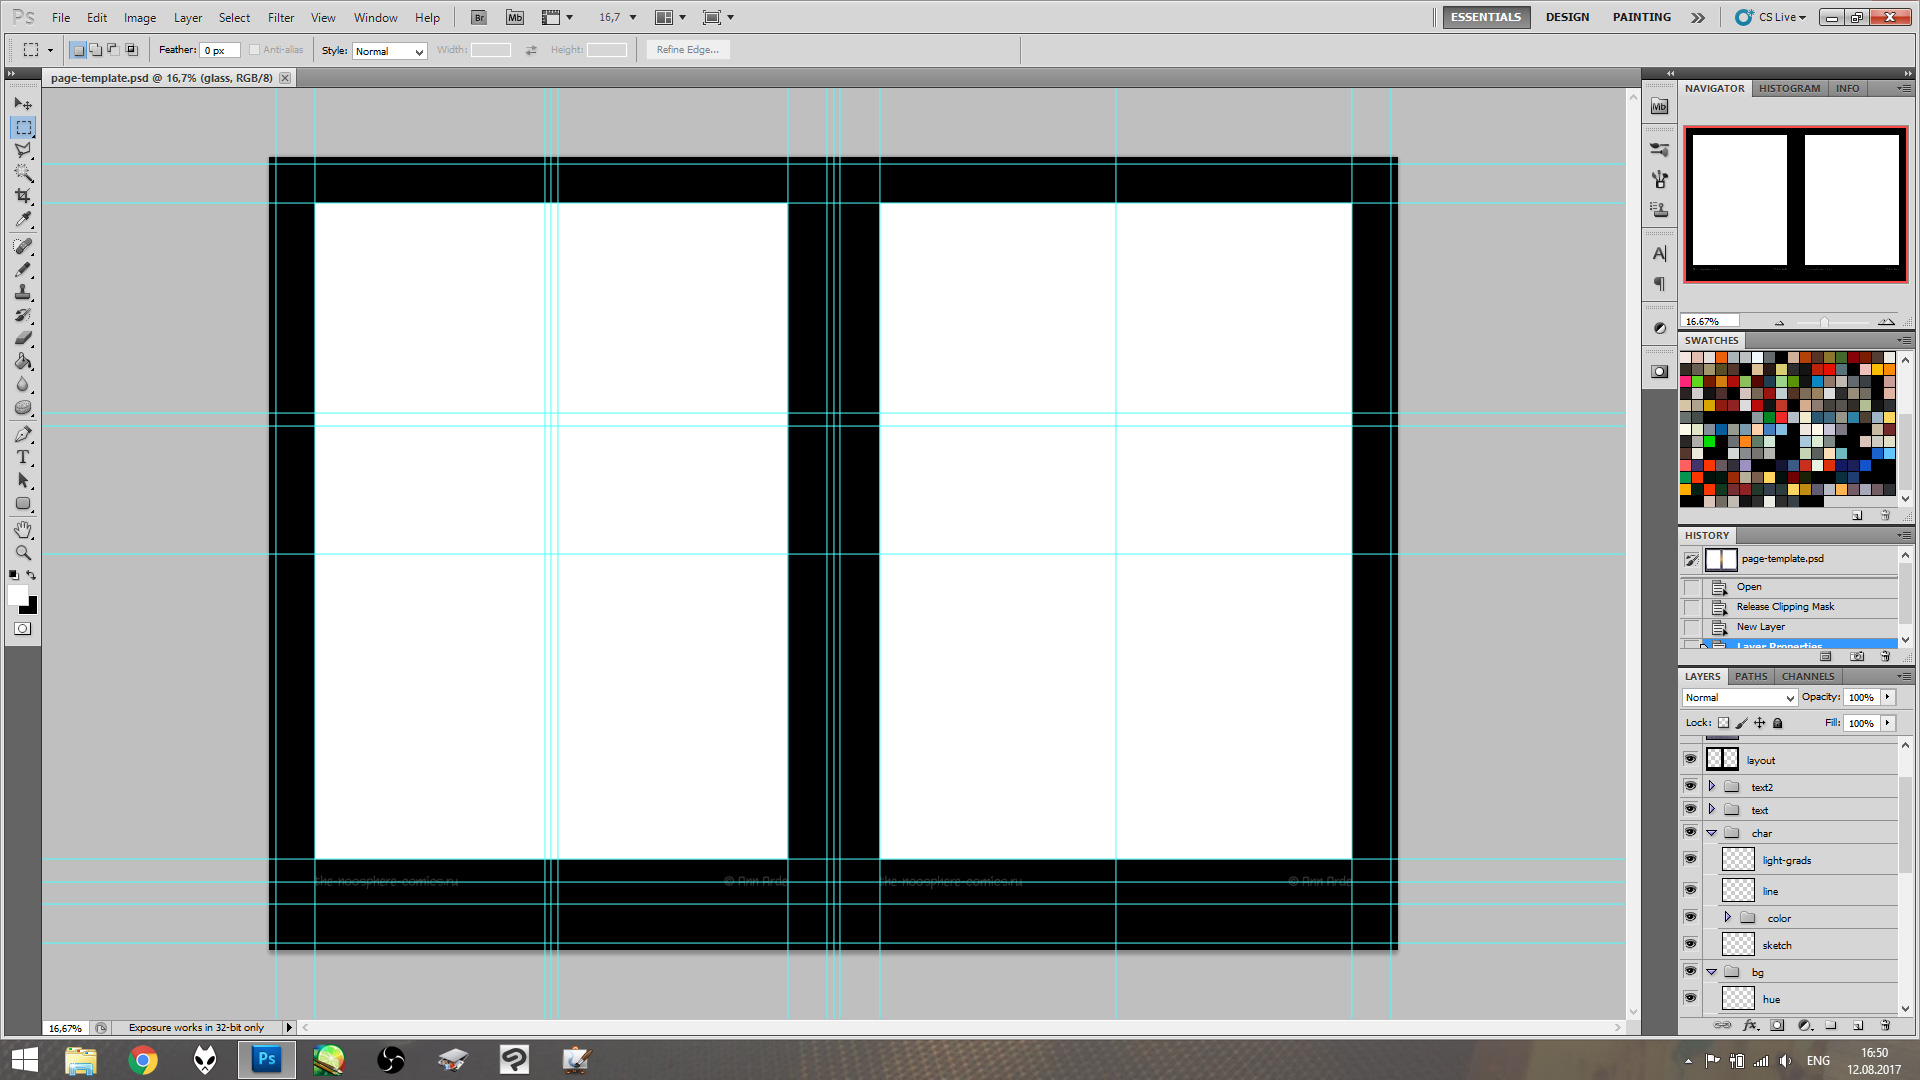 Step 1: page template